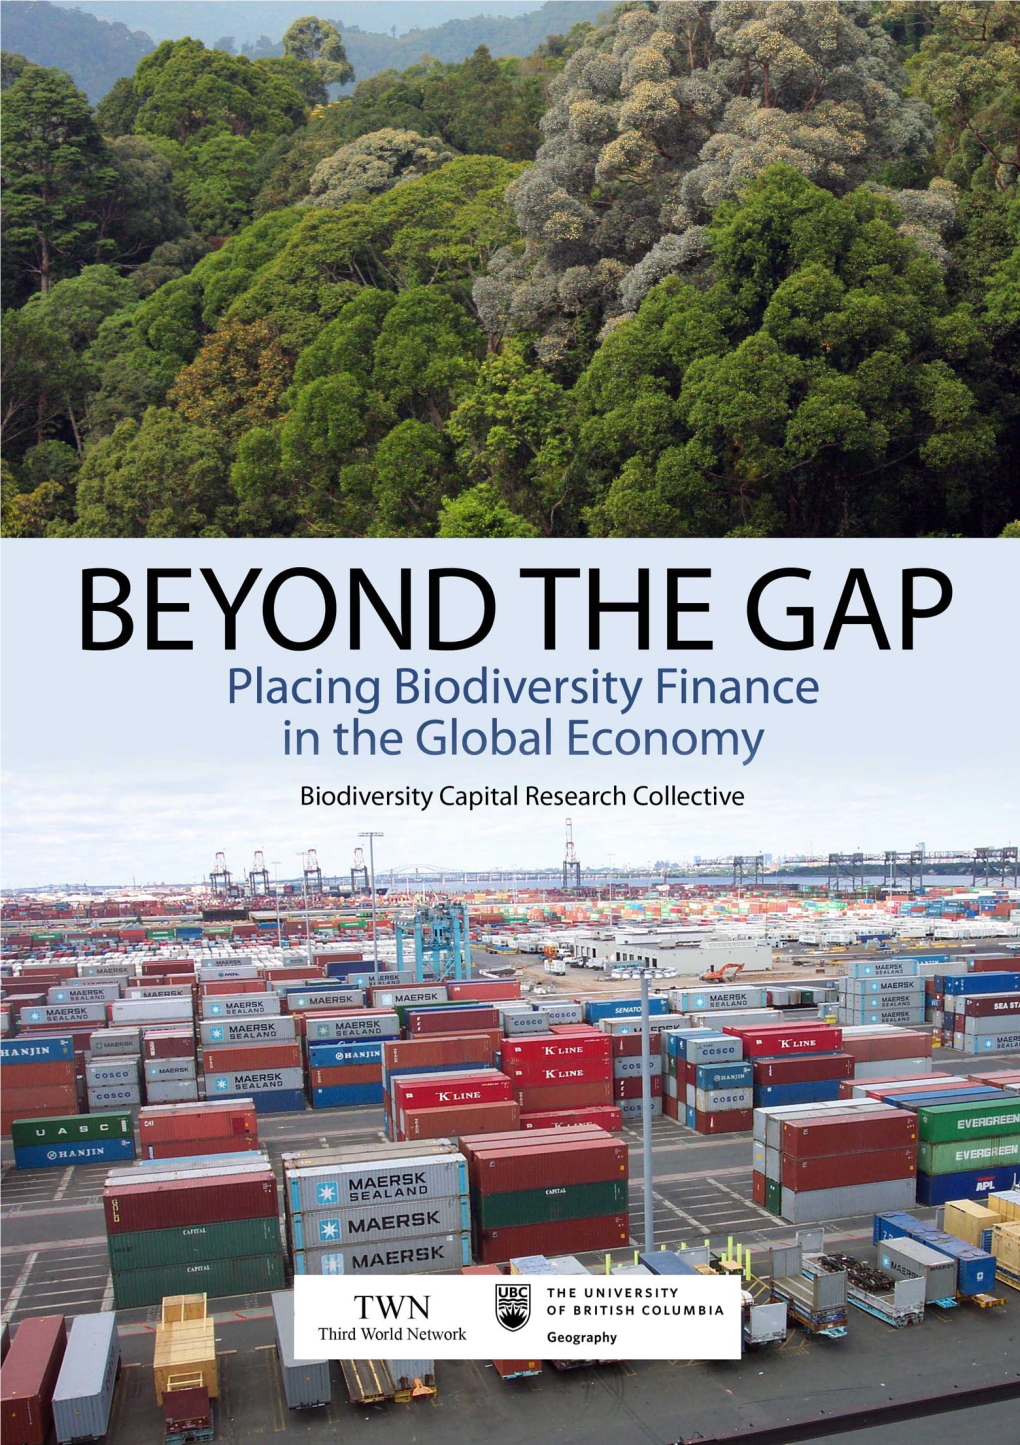 Beyond the Gap: Placing Biodiversity Finance in the Global Economy Biodiversity Capital Research Collective1